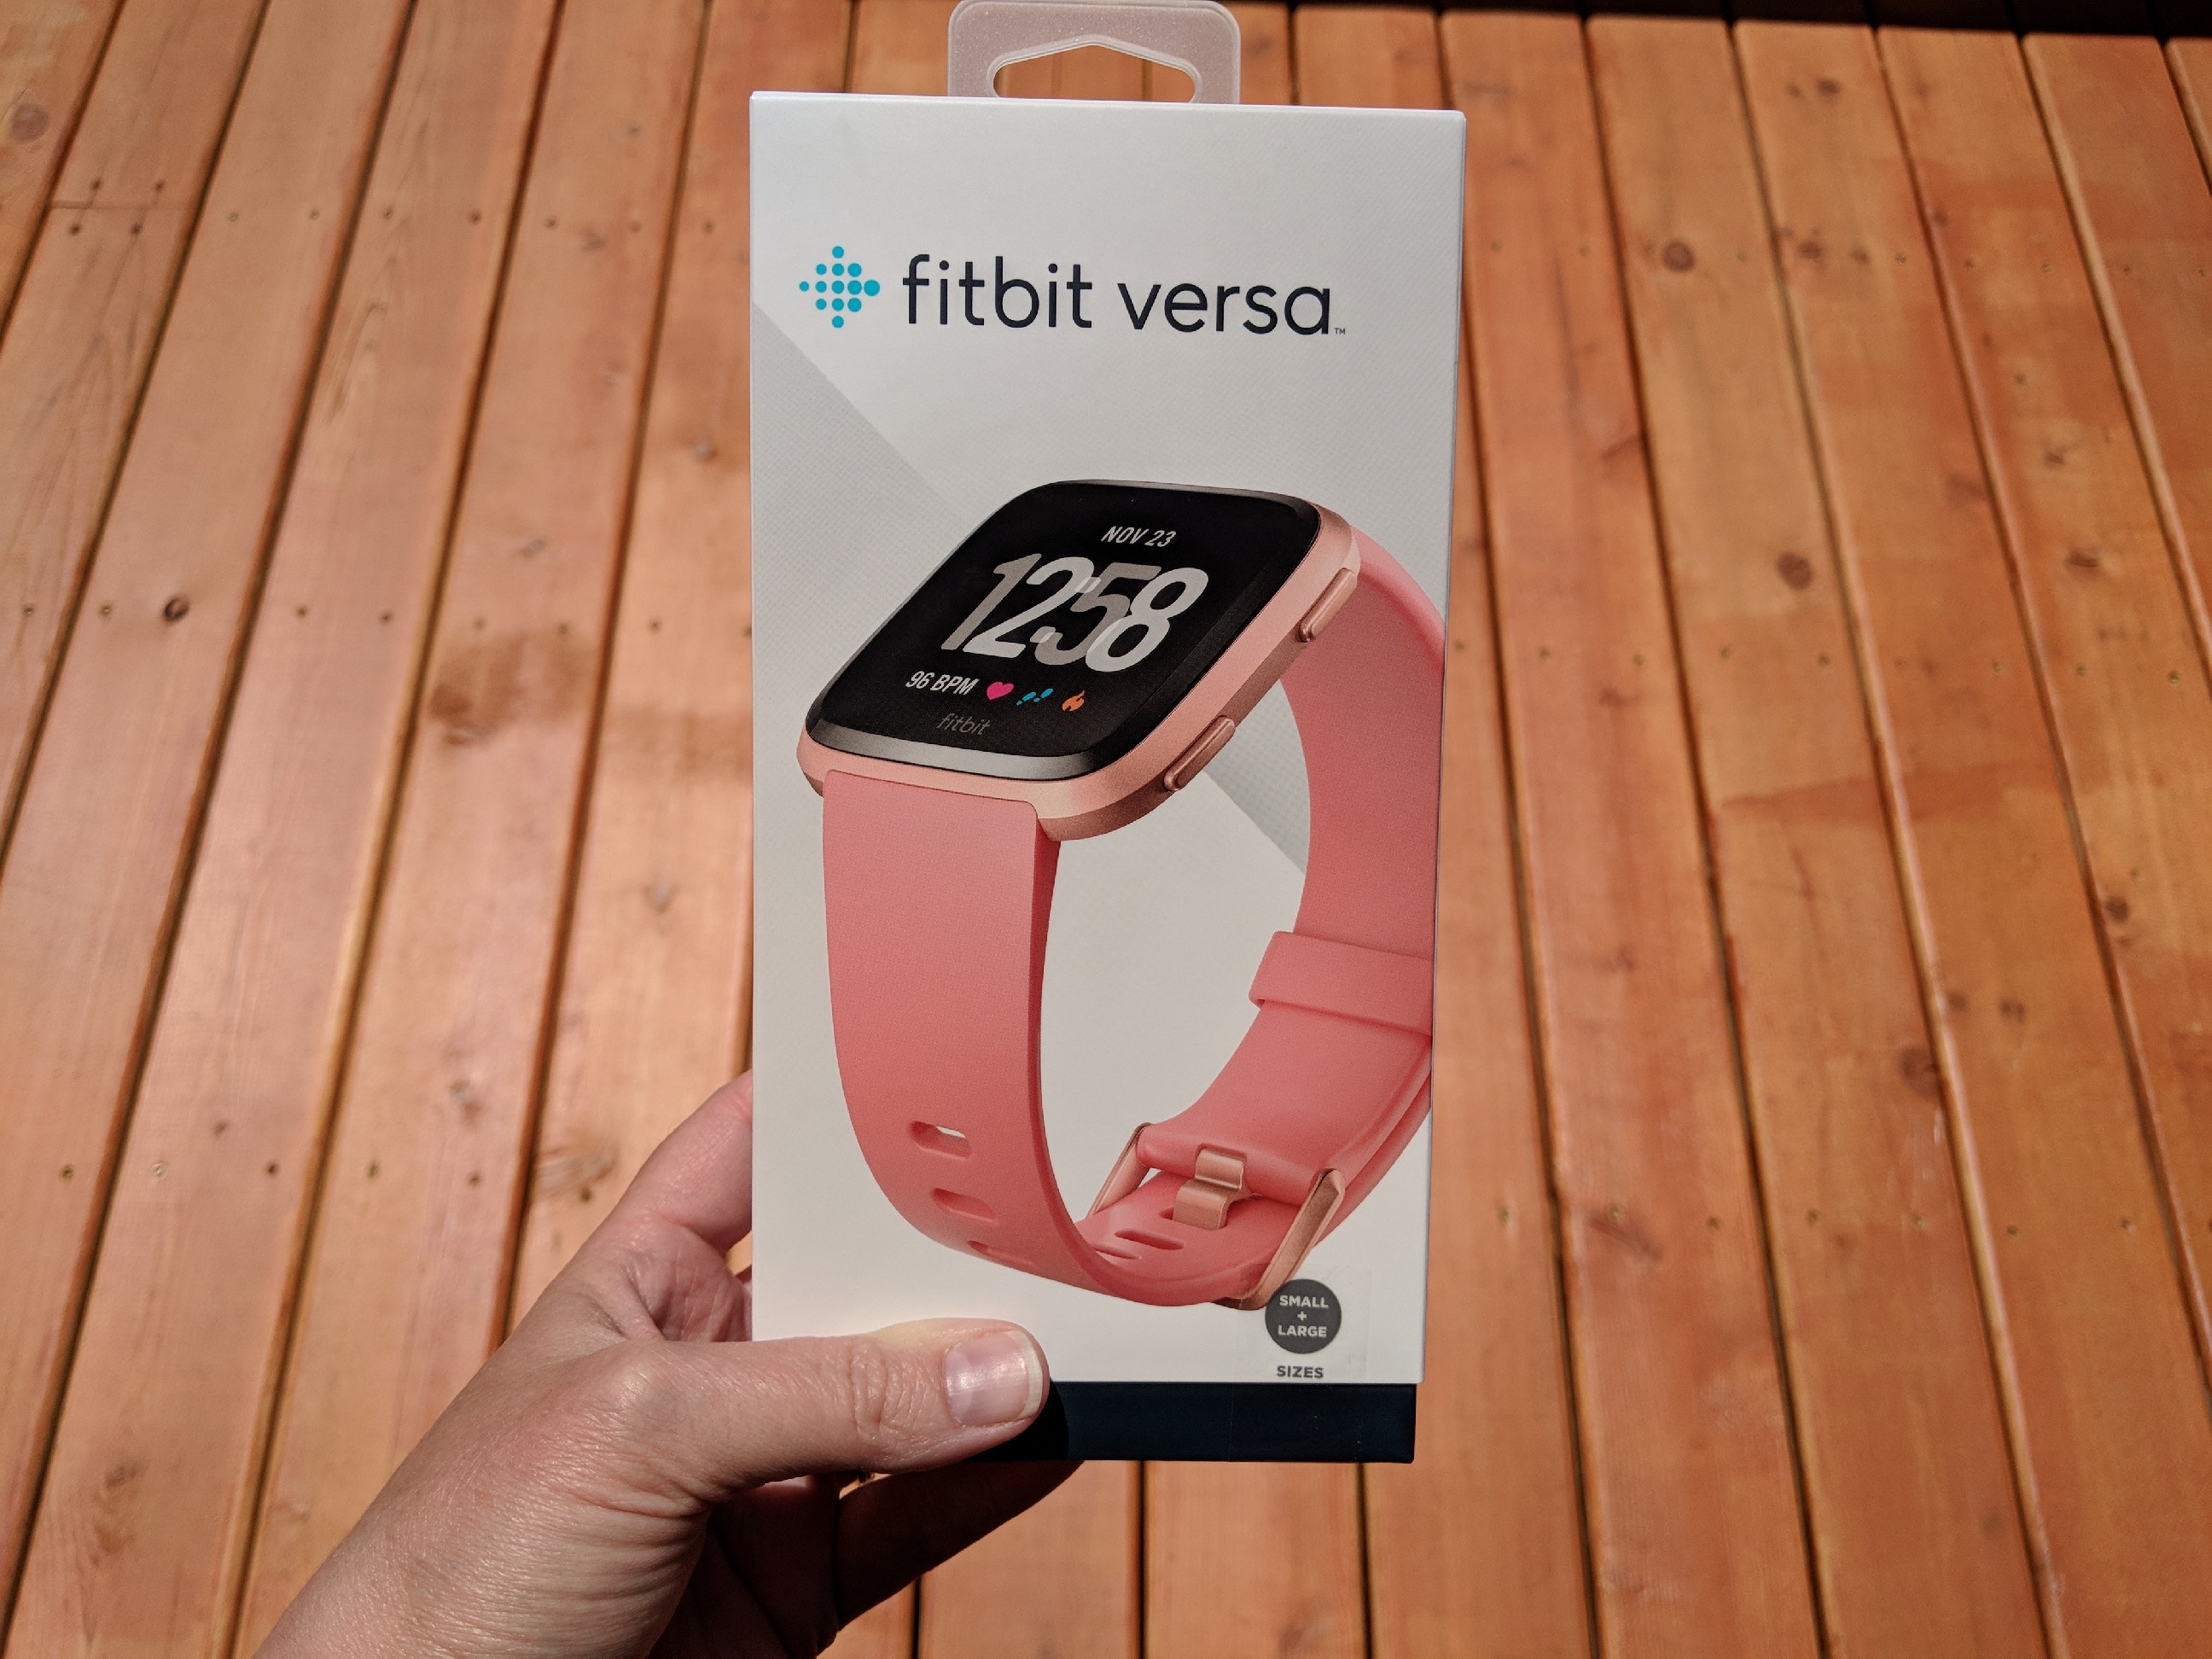 kohl's fitbit versa special edition